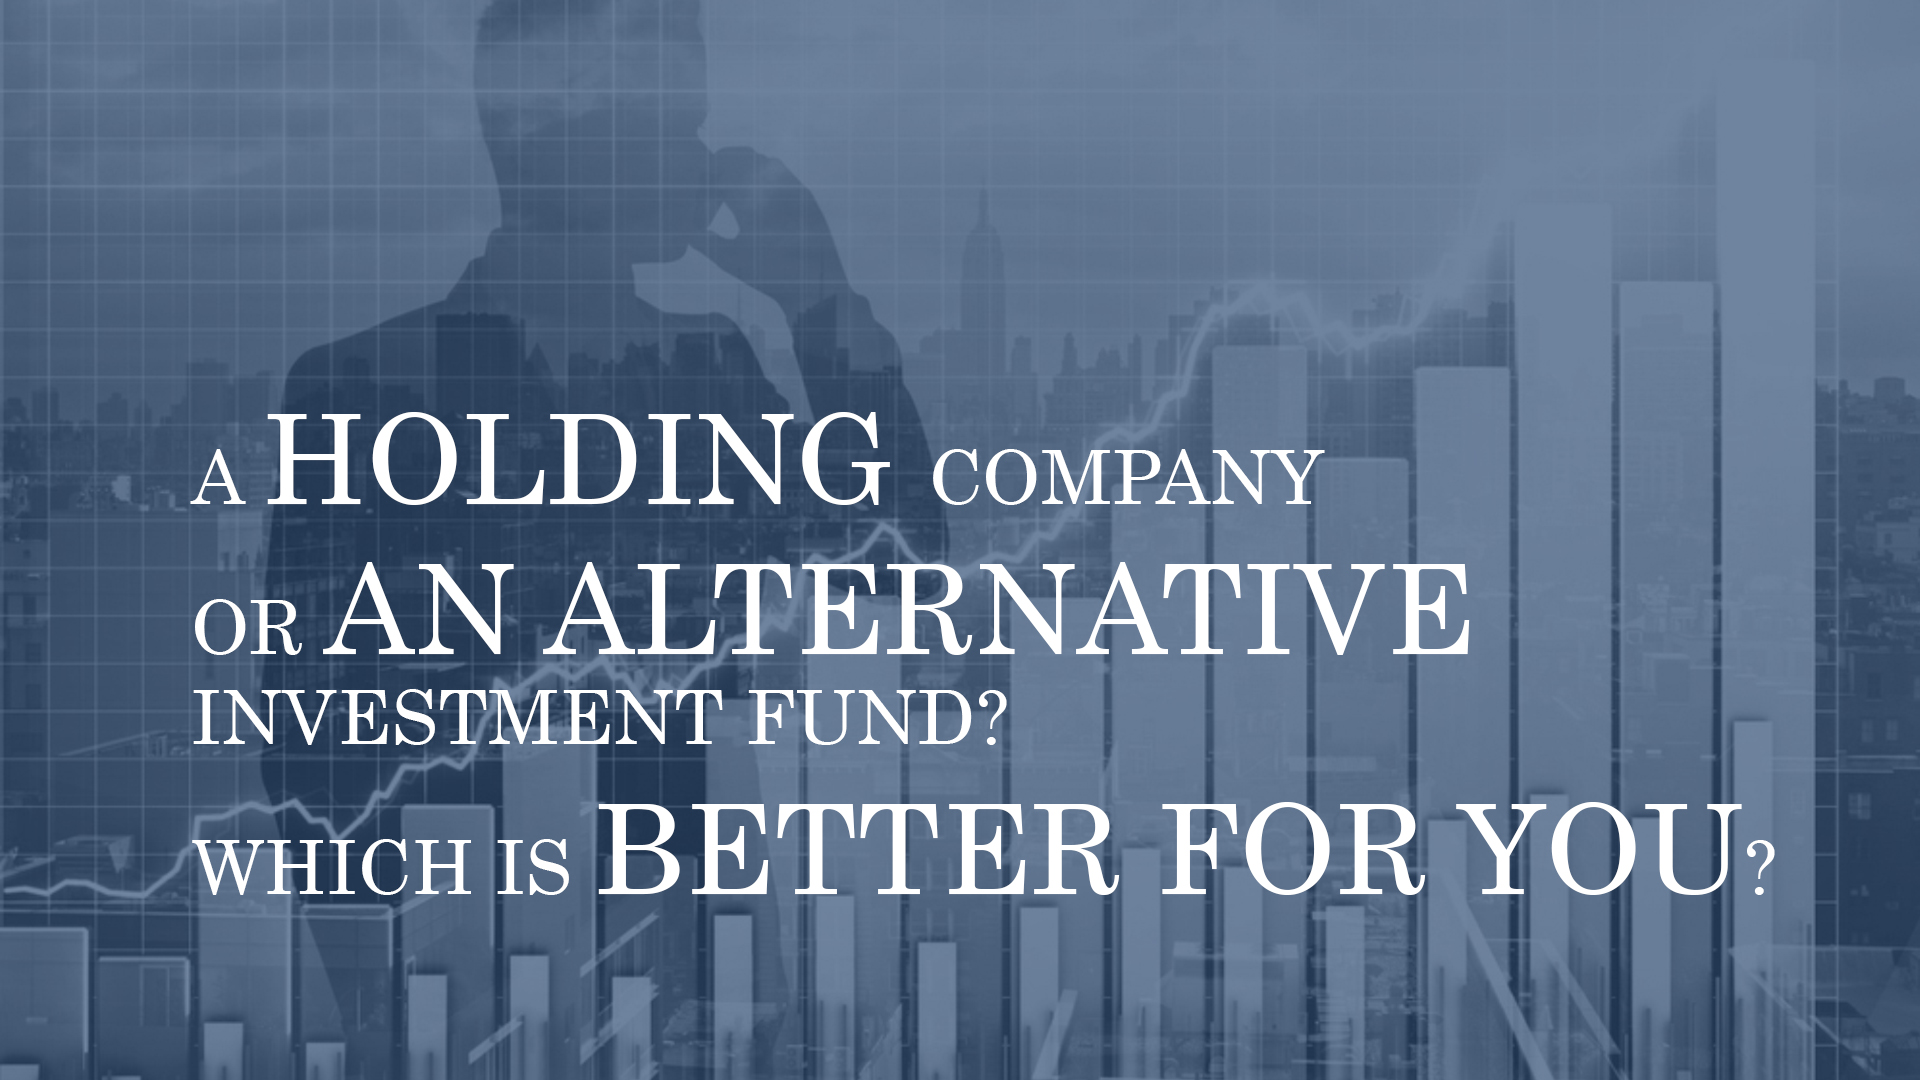 A HOLDING COMPANY OR AN ALTERNATIVE INVESTMENT FUND? Which is better for you?